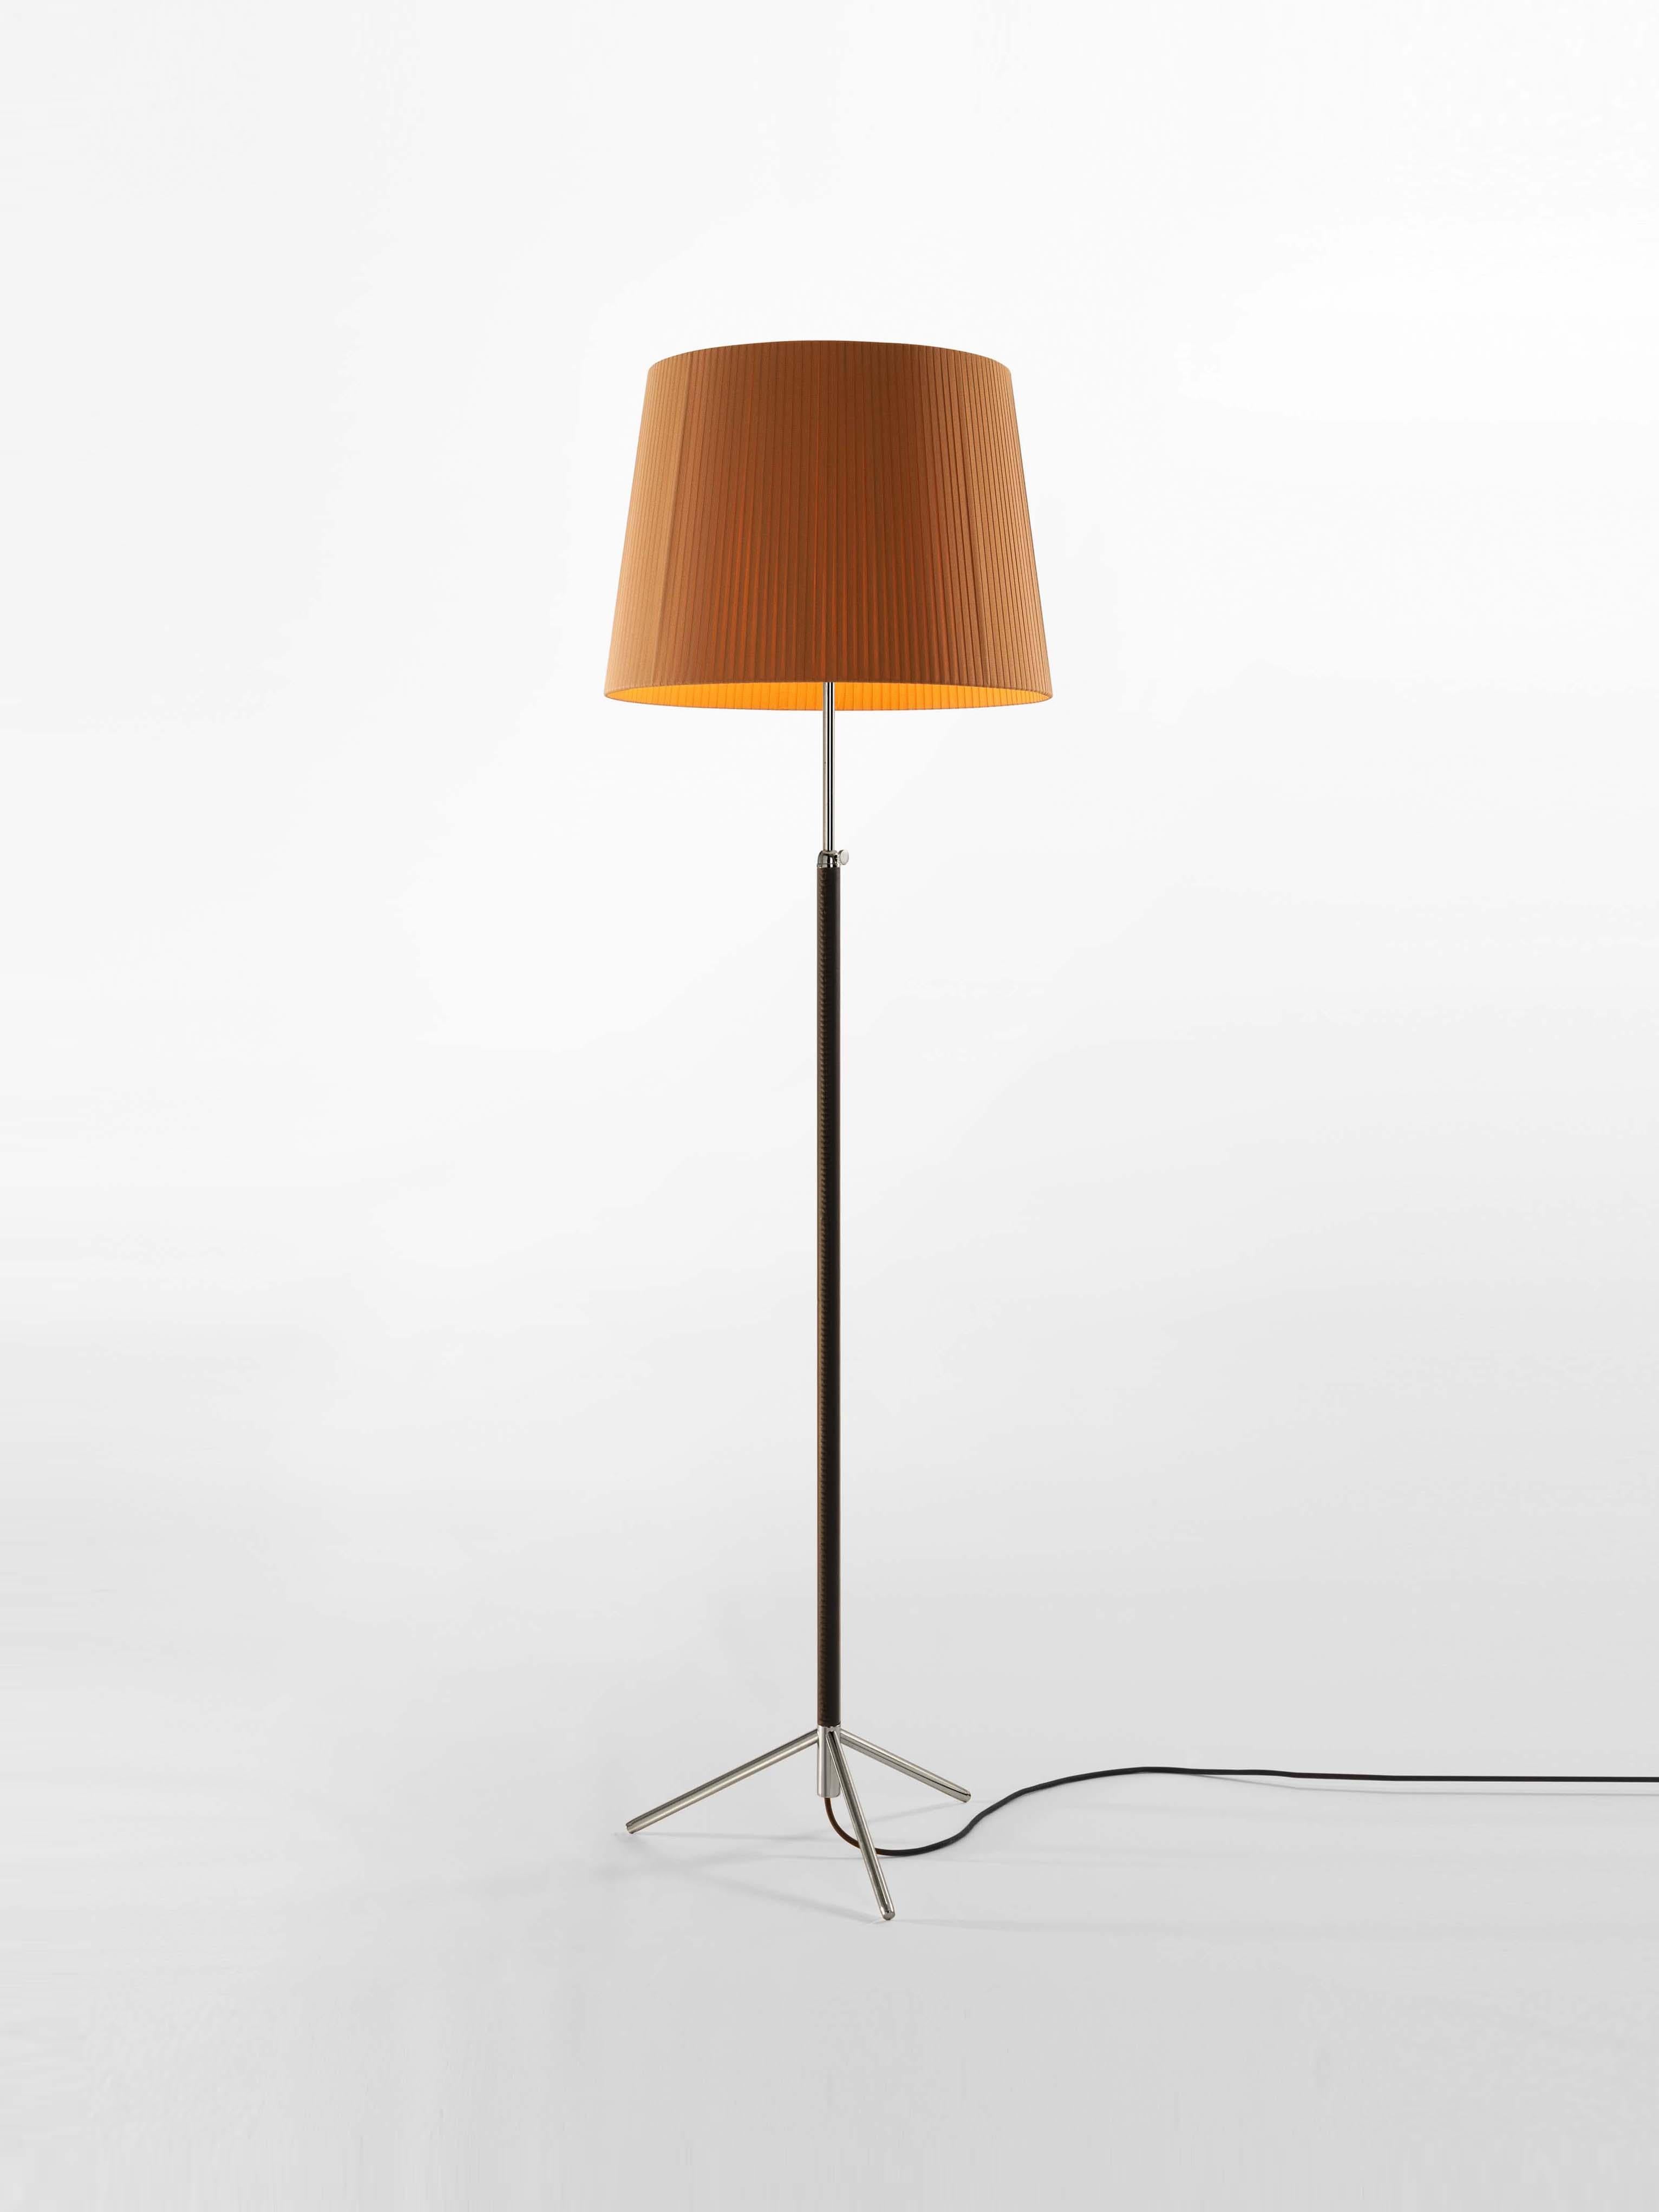 Mustard and chrome Pie de Salón G1 floor lamp by Jaume Sans
Dimensions: D 45 x H 120-160 cm
Materials: Metal, leather, ribbon.
Available in chrome-plated or polished brass structure.
Available in other shade colors and sizes.

This slender